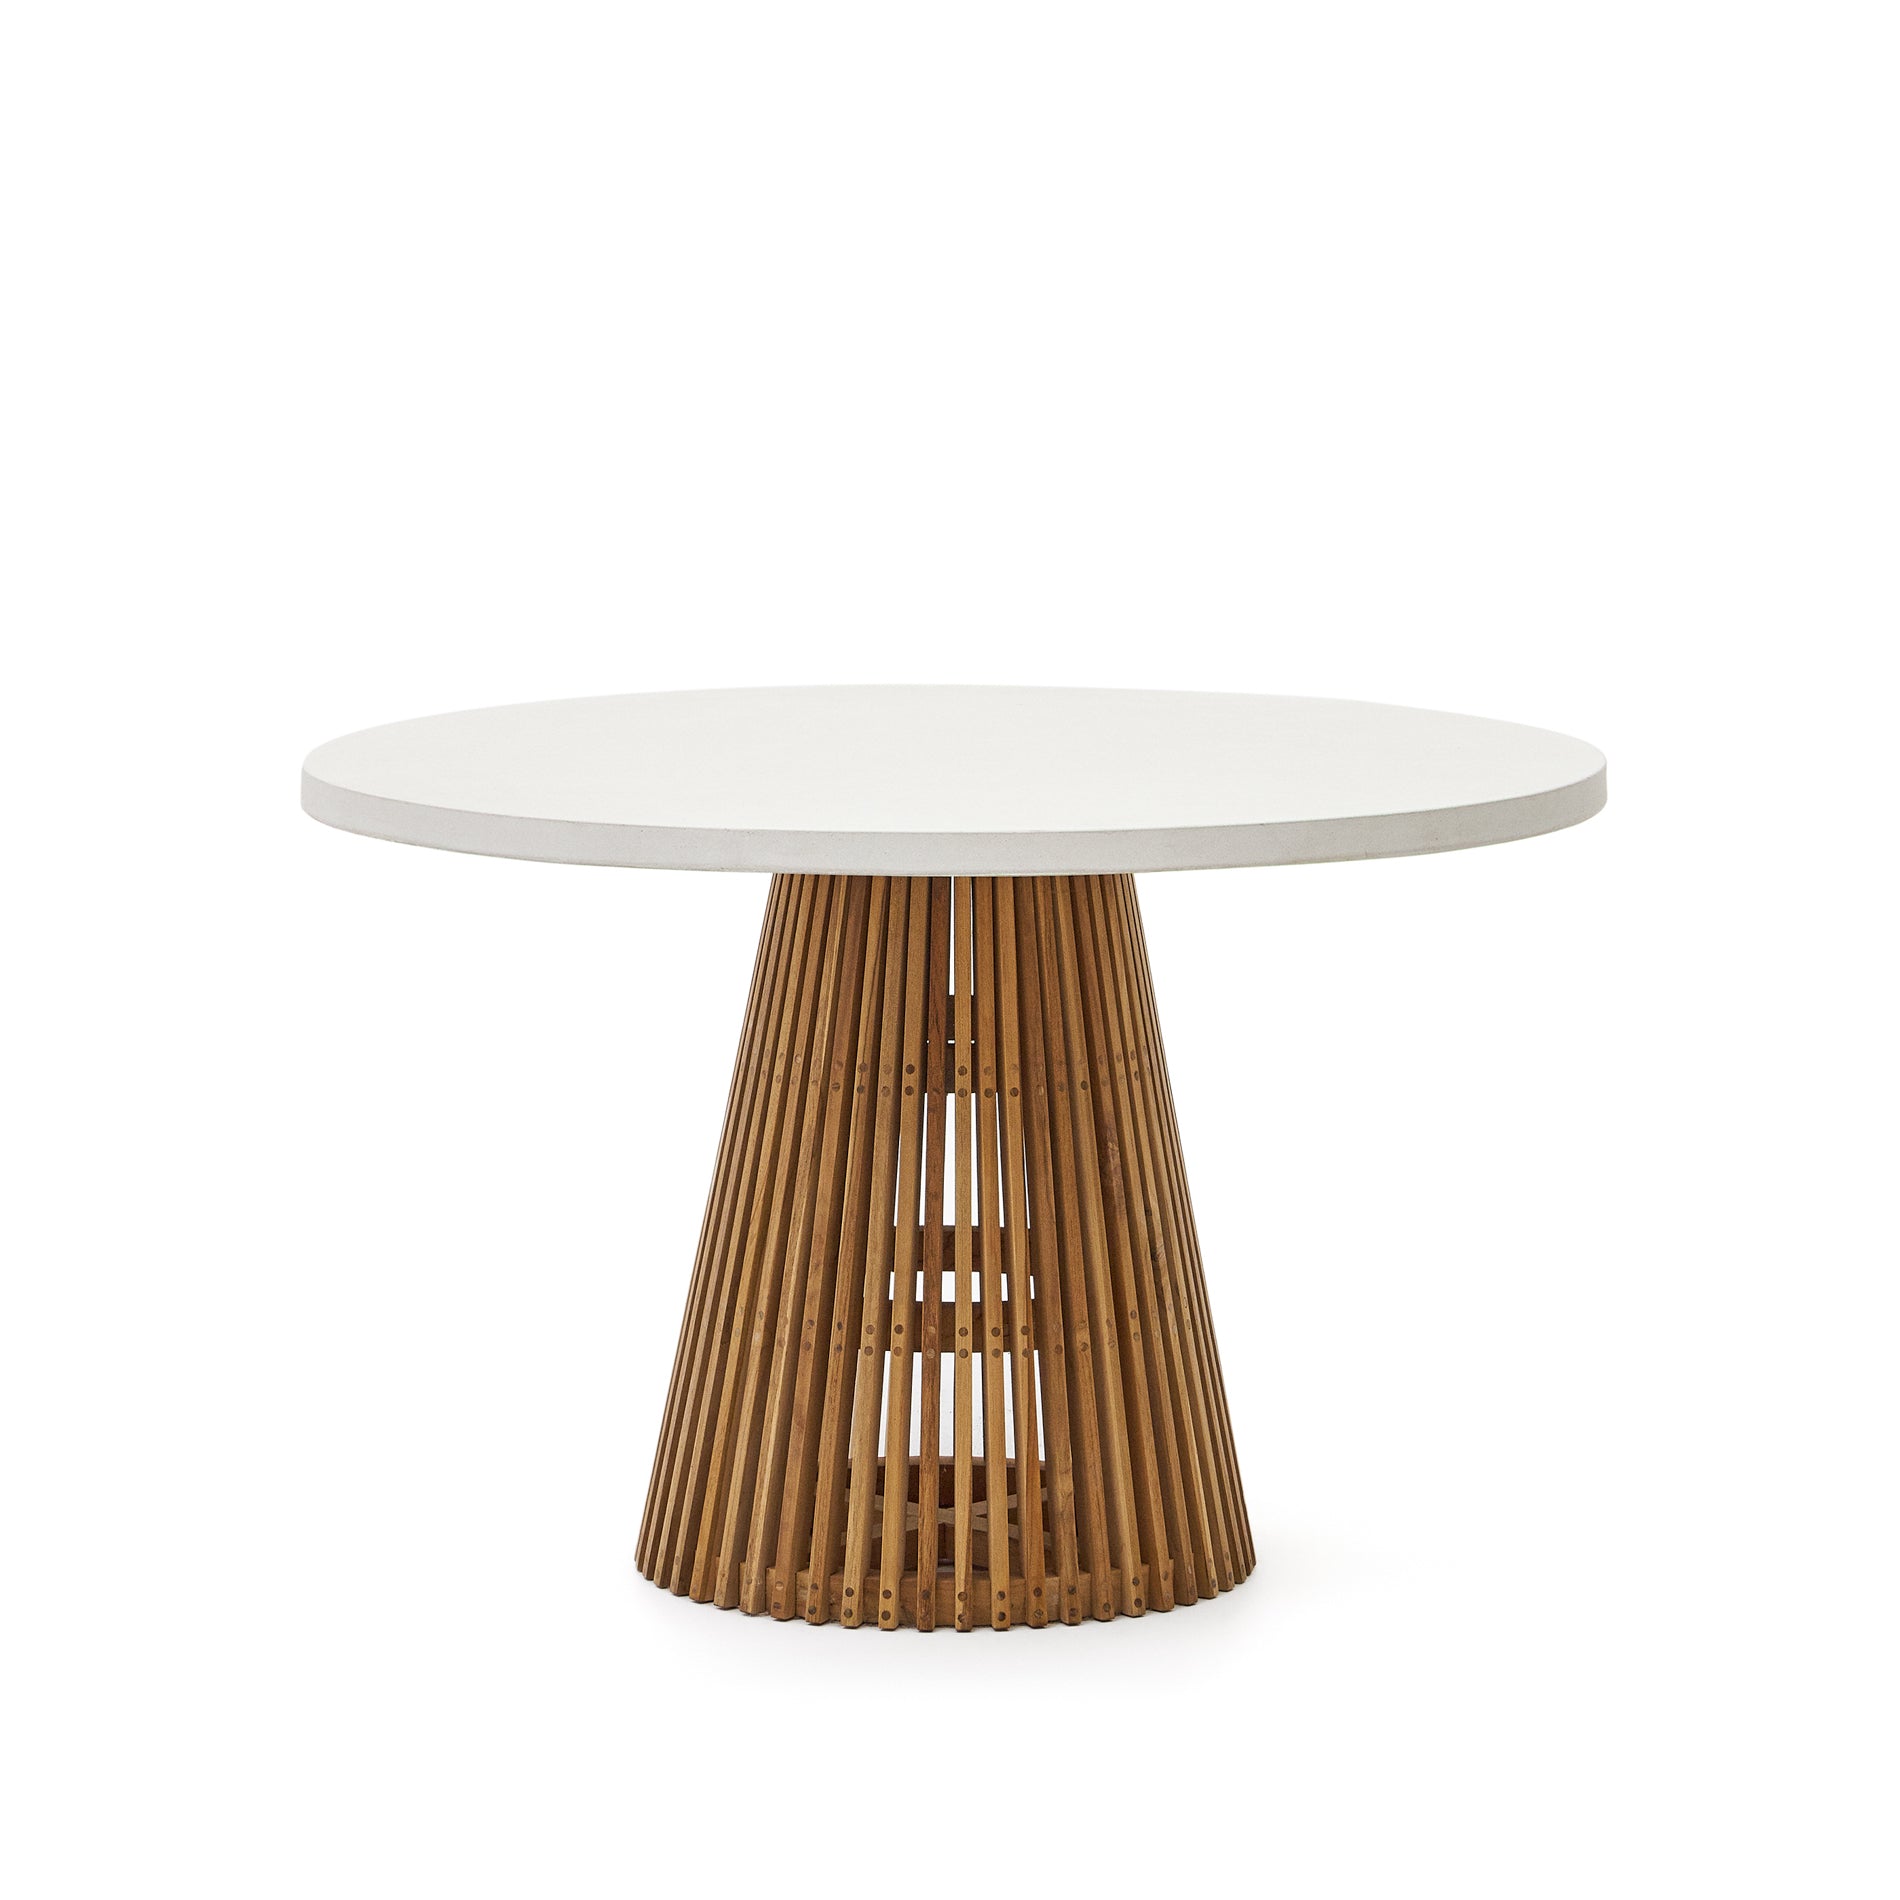 Alcaufar round outdoor table made of solid teak and white cement Ø 120 cm